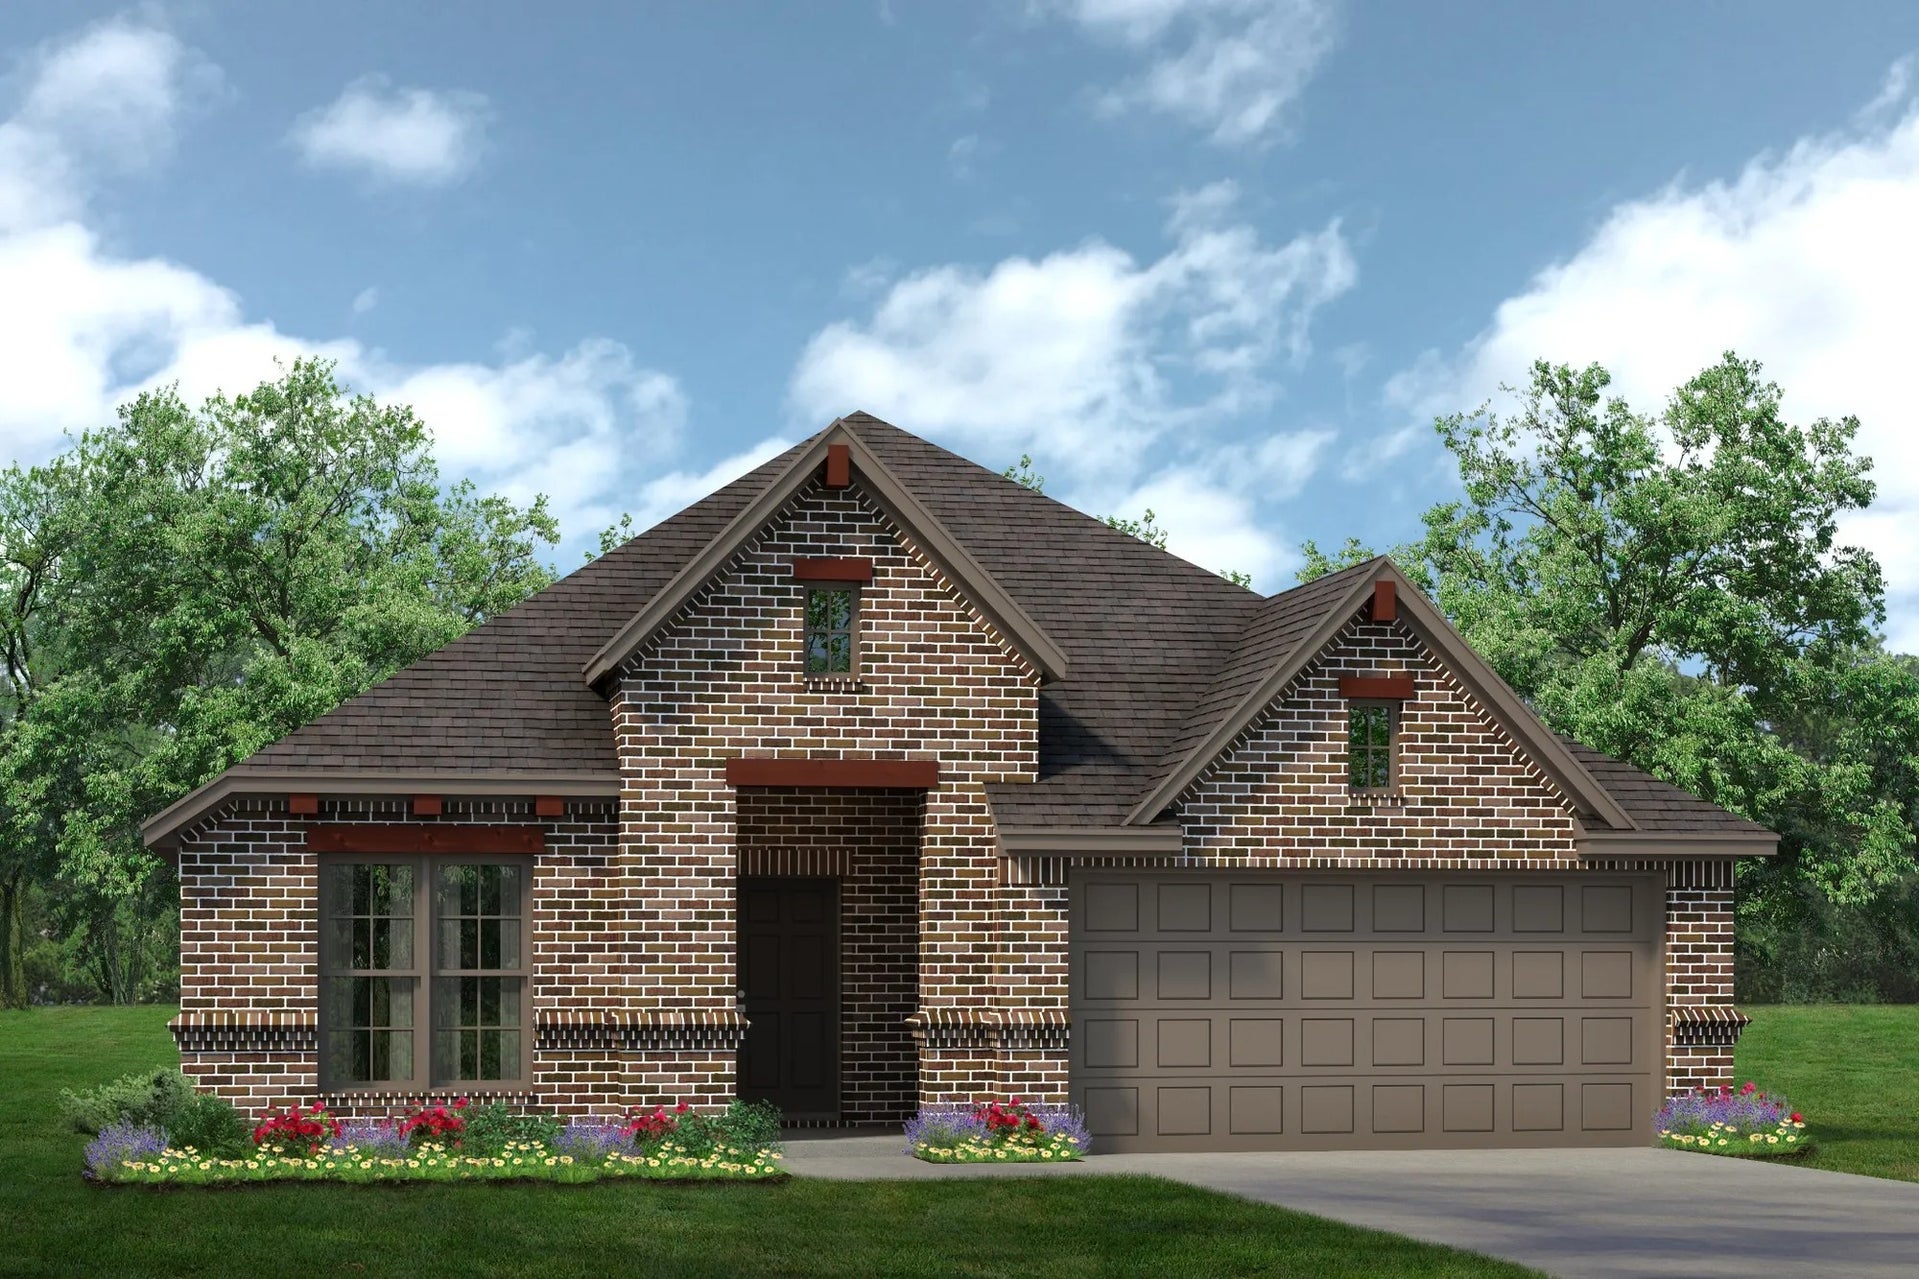 2186 C. Concept 2186 Home with 4 Bedrooms